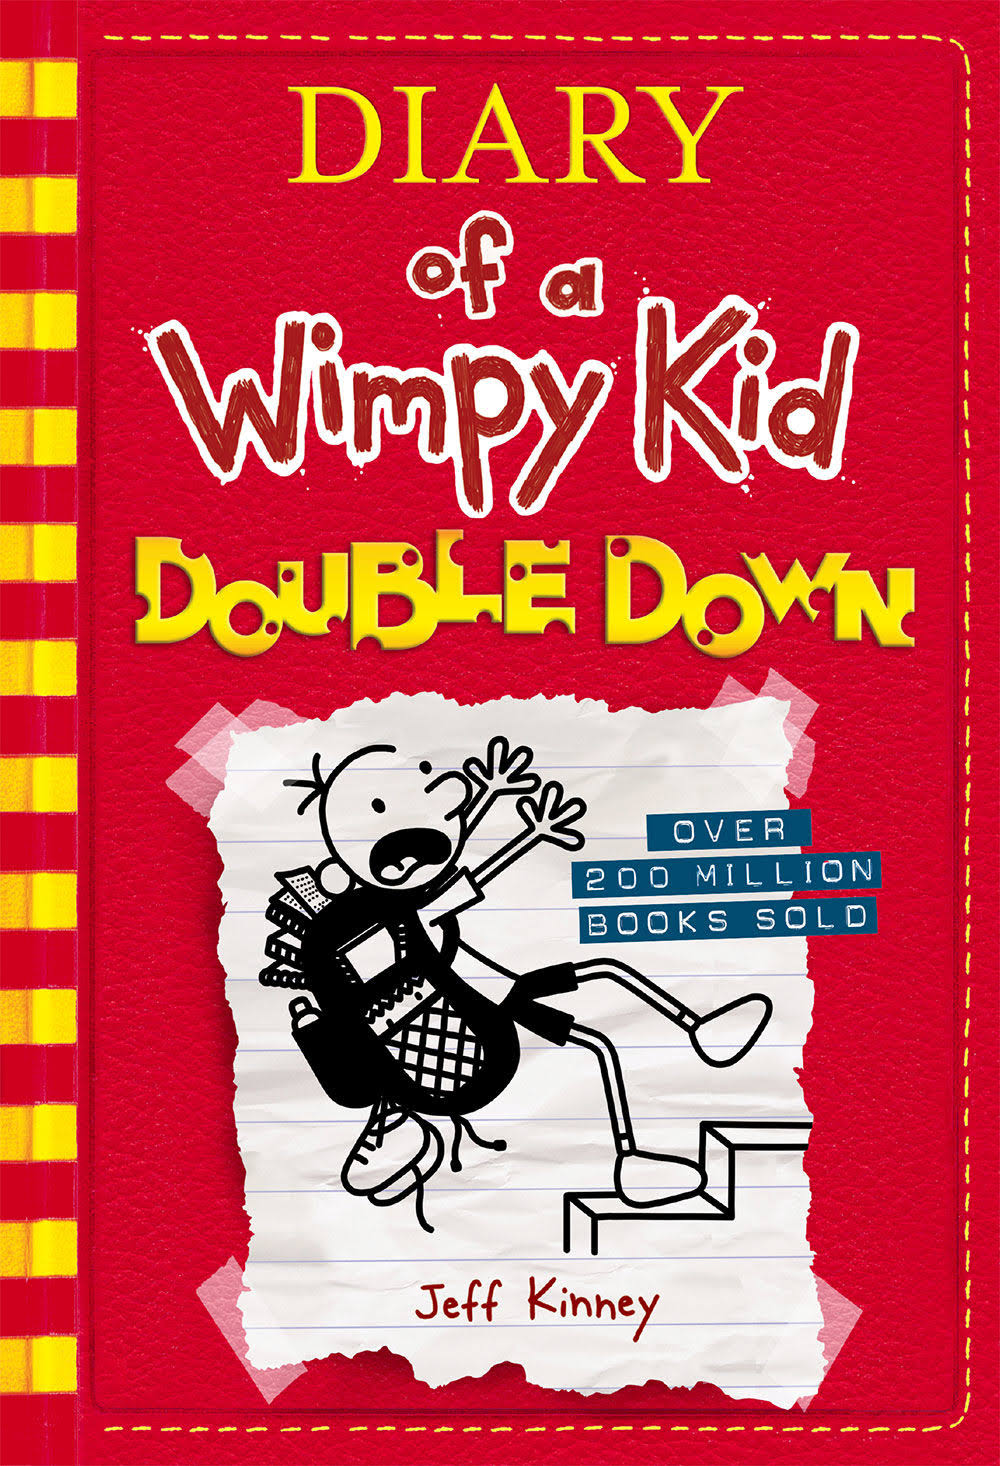 Double Down (Diary of a Wimpy Kid #11) [Book]